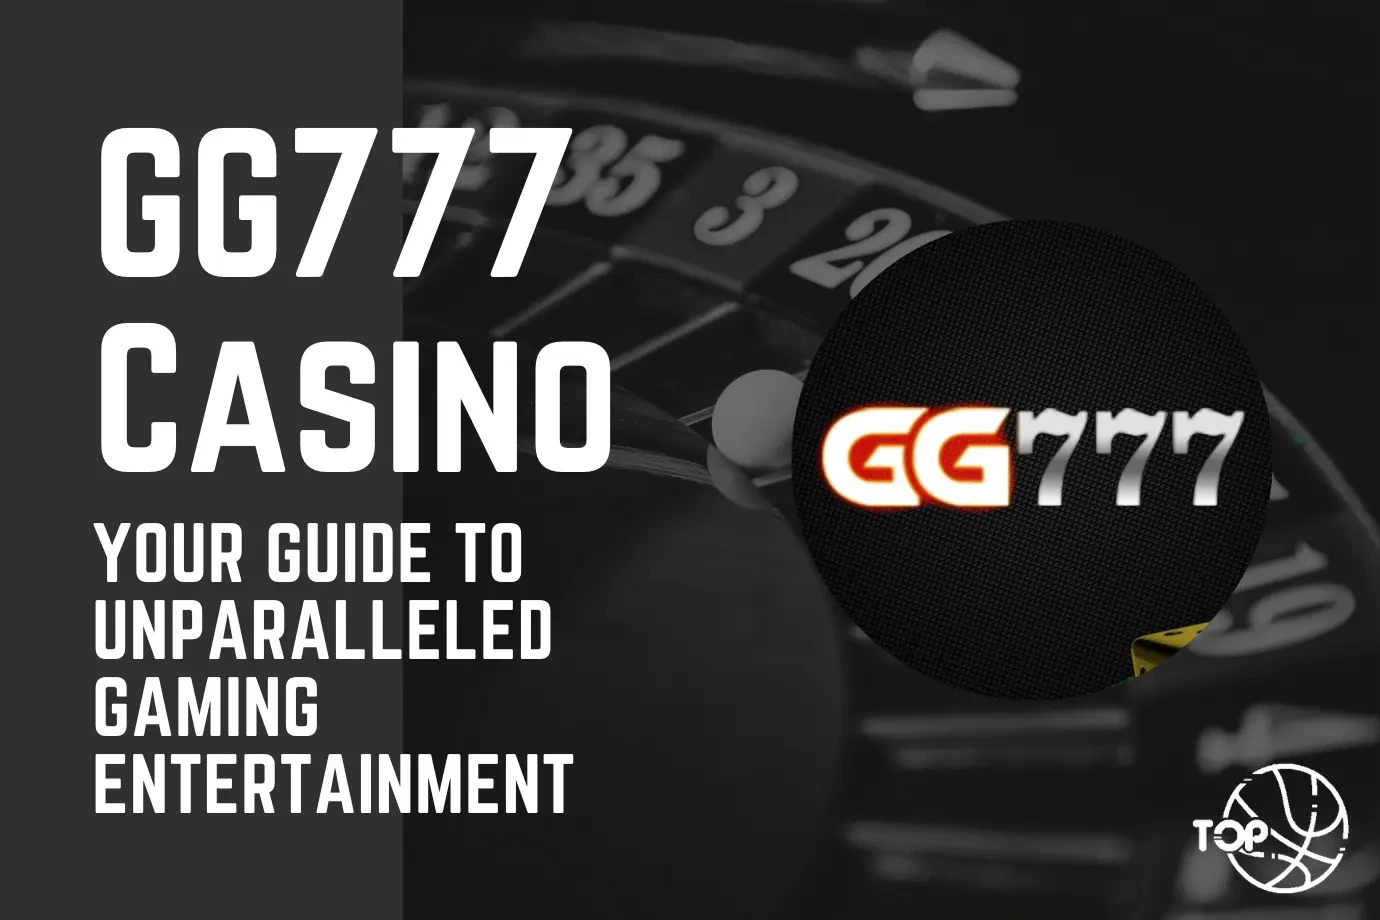 gg777 Review